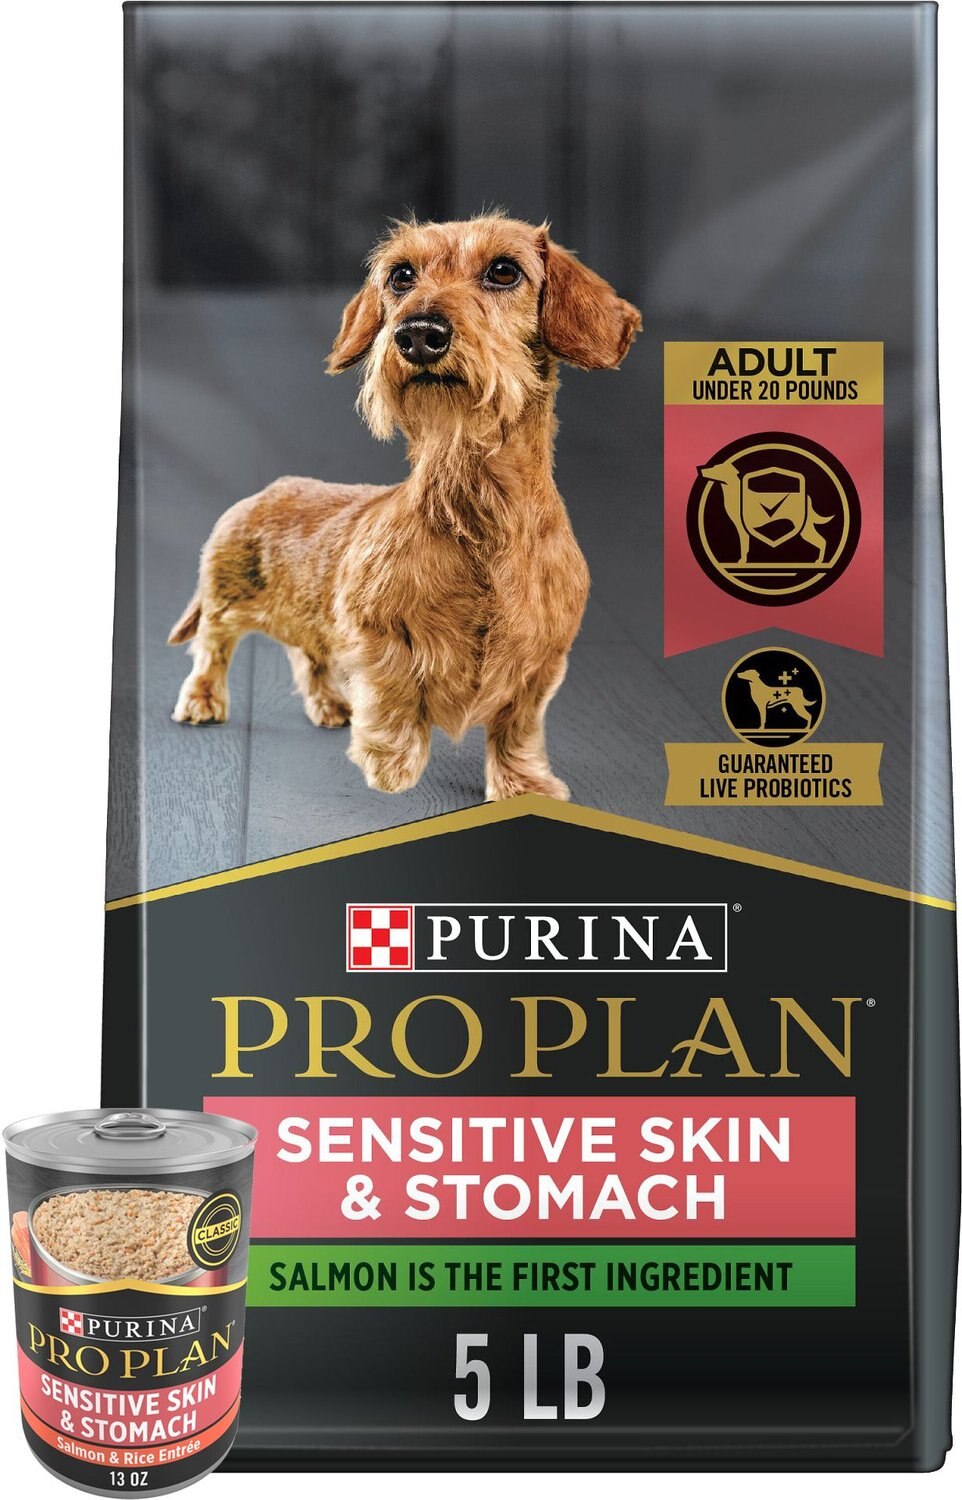 Bundle: Purina Small Breed Adult Sensitive Skin & Stomach  + Focus Classic Salmon & Rice Canned